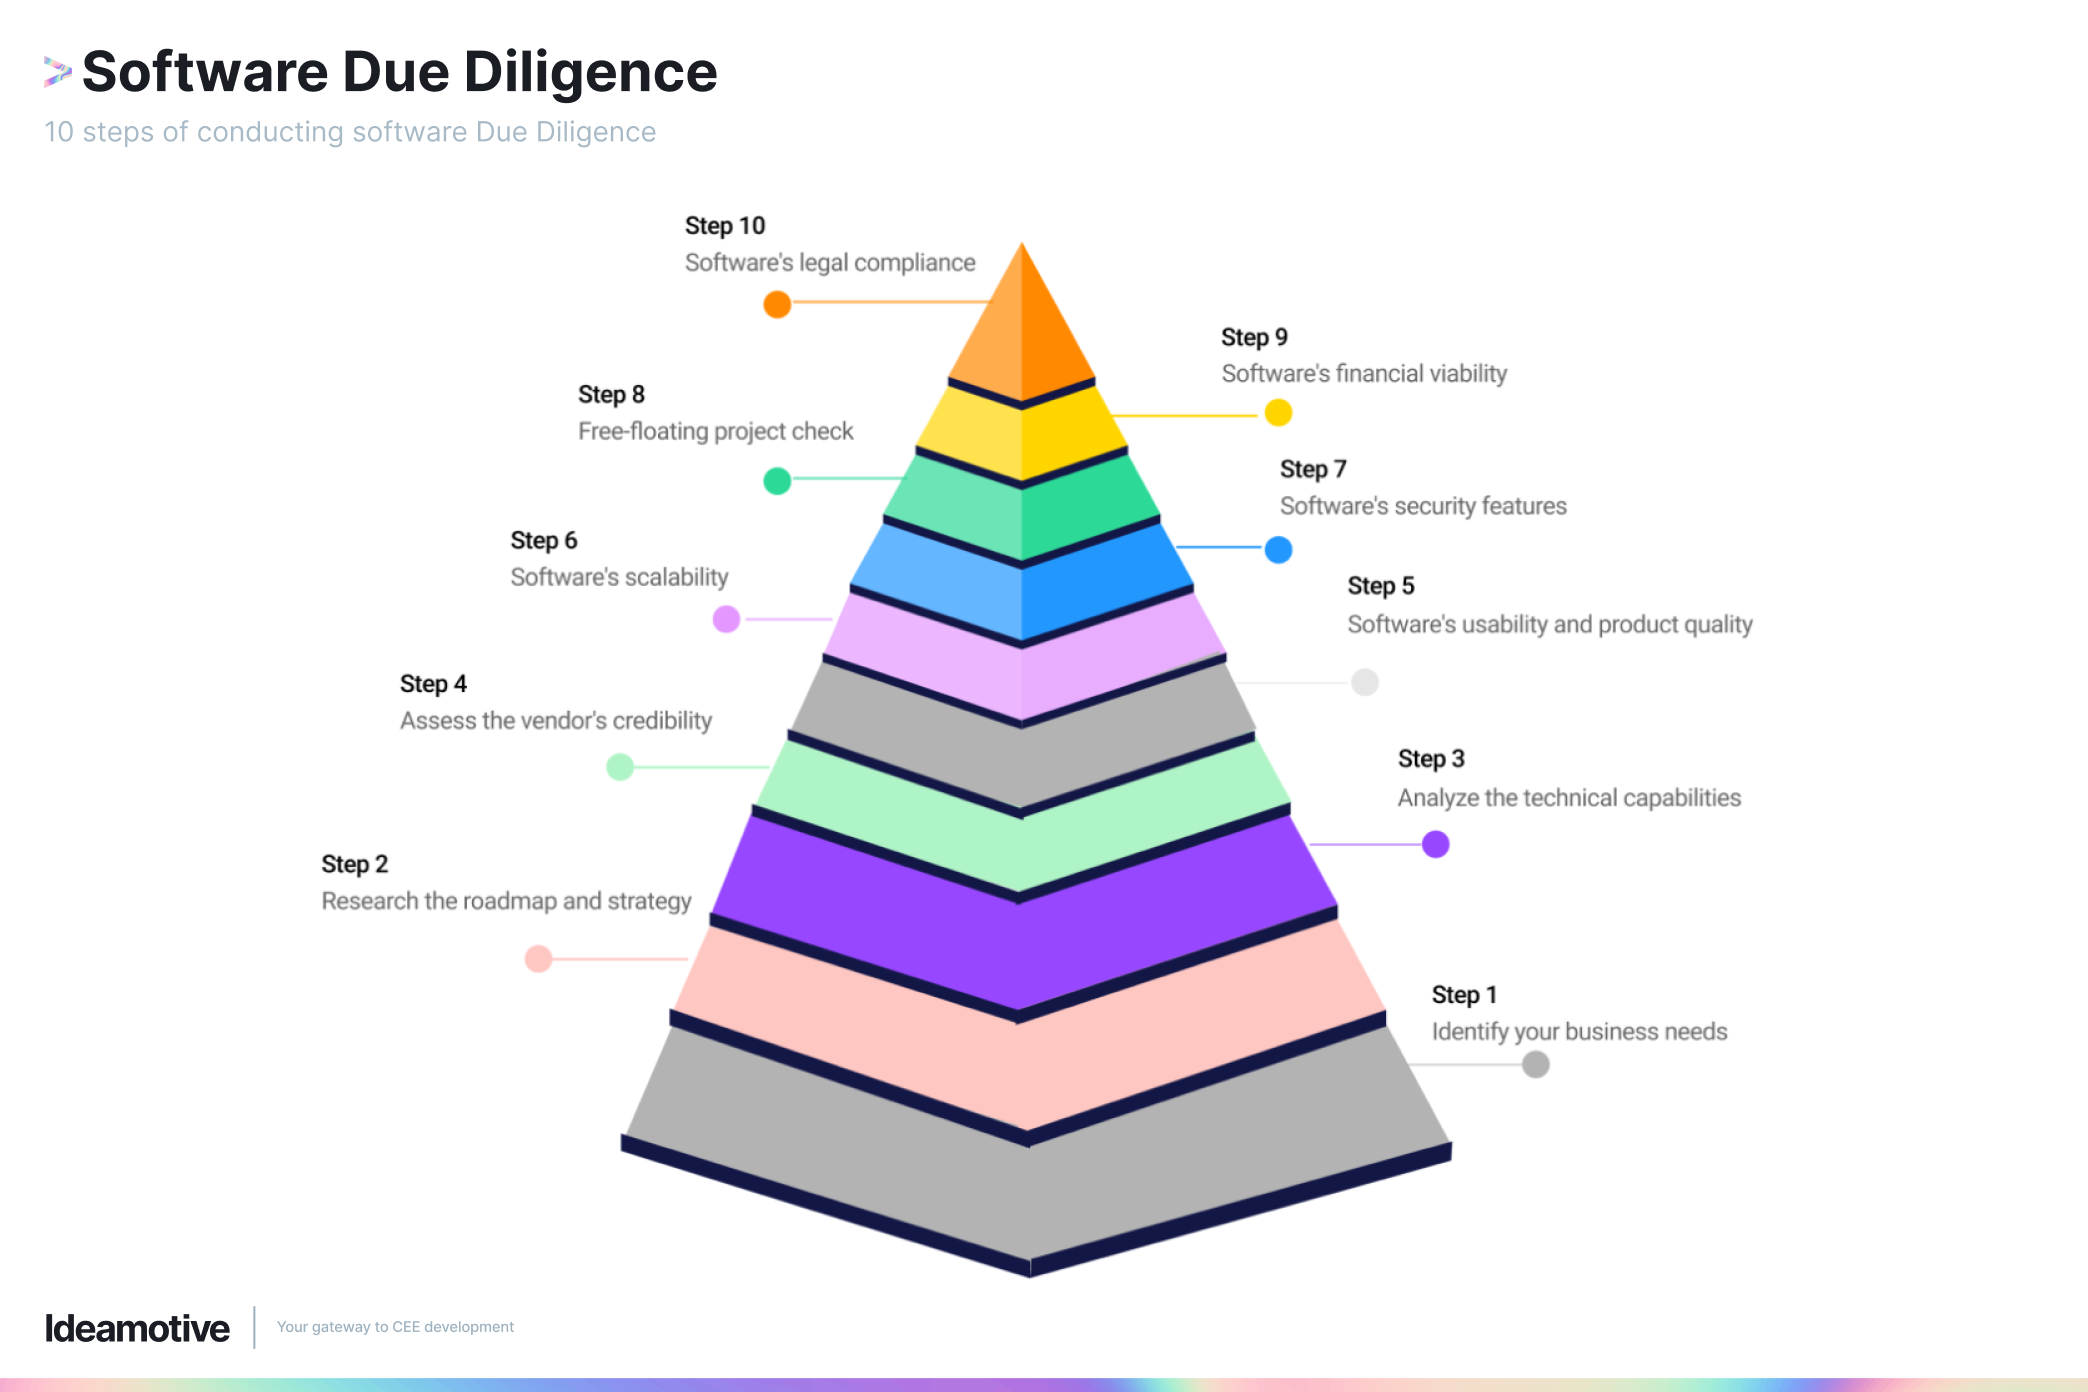 10 steps of conducting software Due Diligence